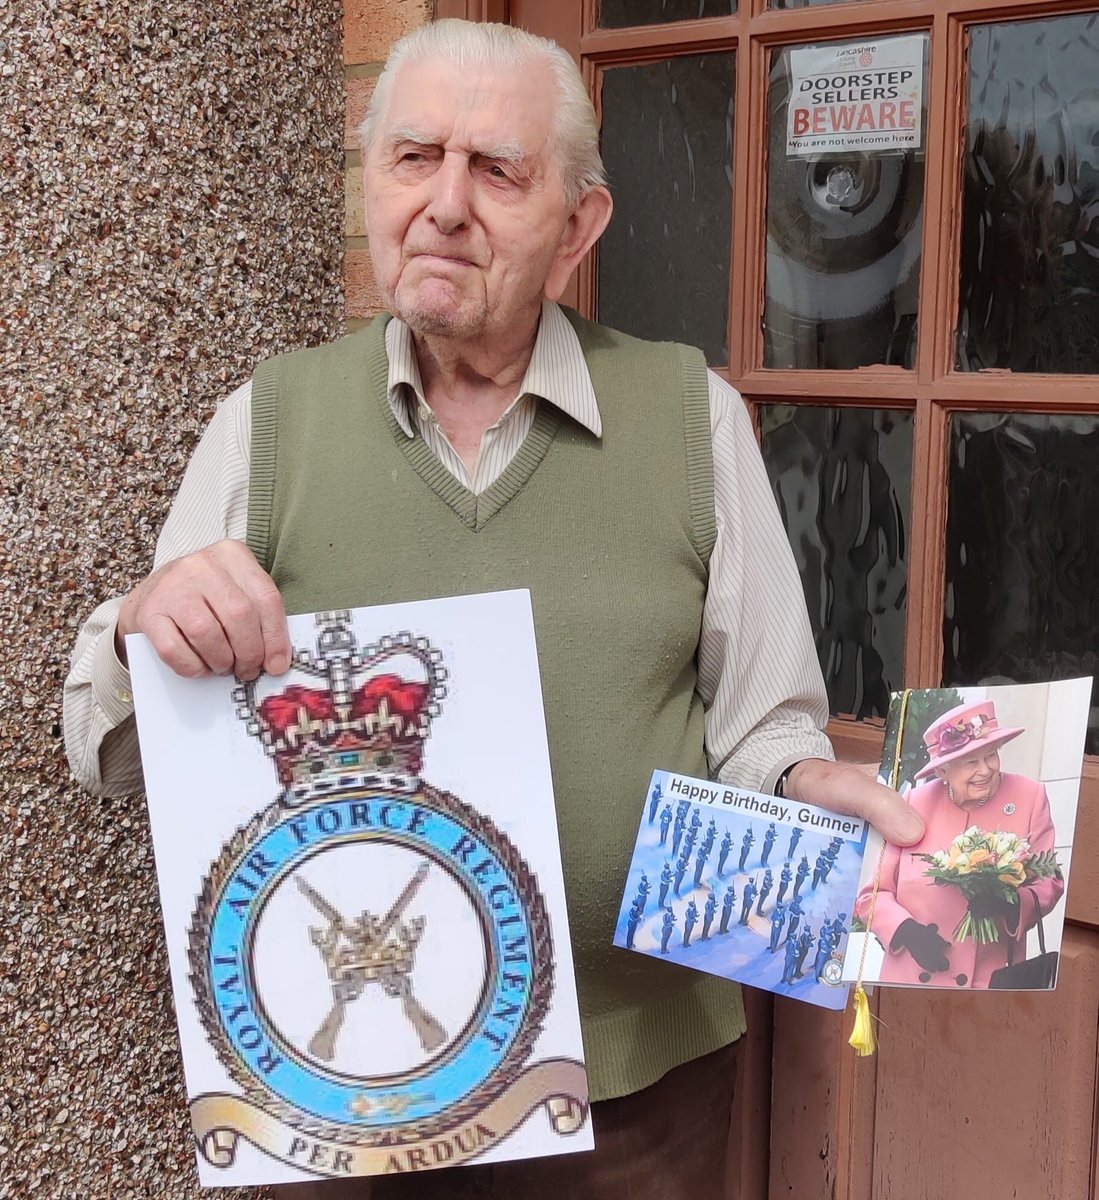 @RAF_Regiment @FPComd @ShaunGriffin68 @RAFNewsReporter @BFBSRadioHQ @RAFLive Harry is delighted to have been recognised by @RAF_Regiment and @FPComd on his 100th Birthday and says thank you so much for the cards (as special as his card from The Queen!)